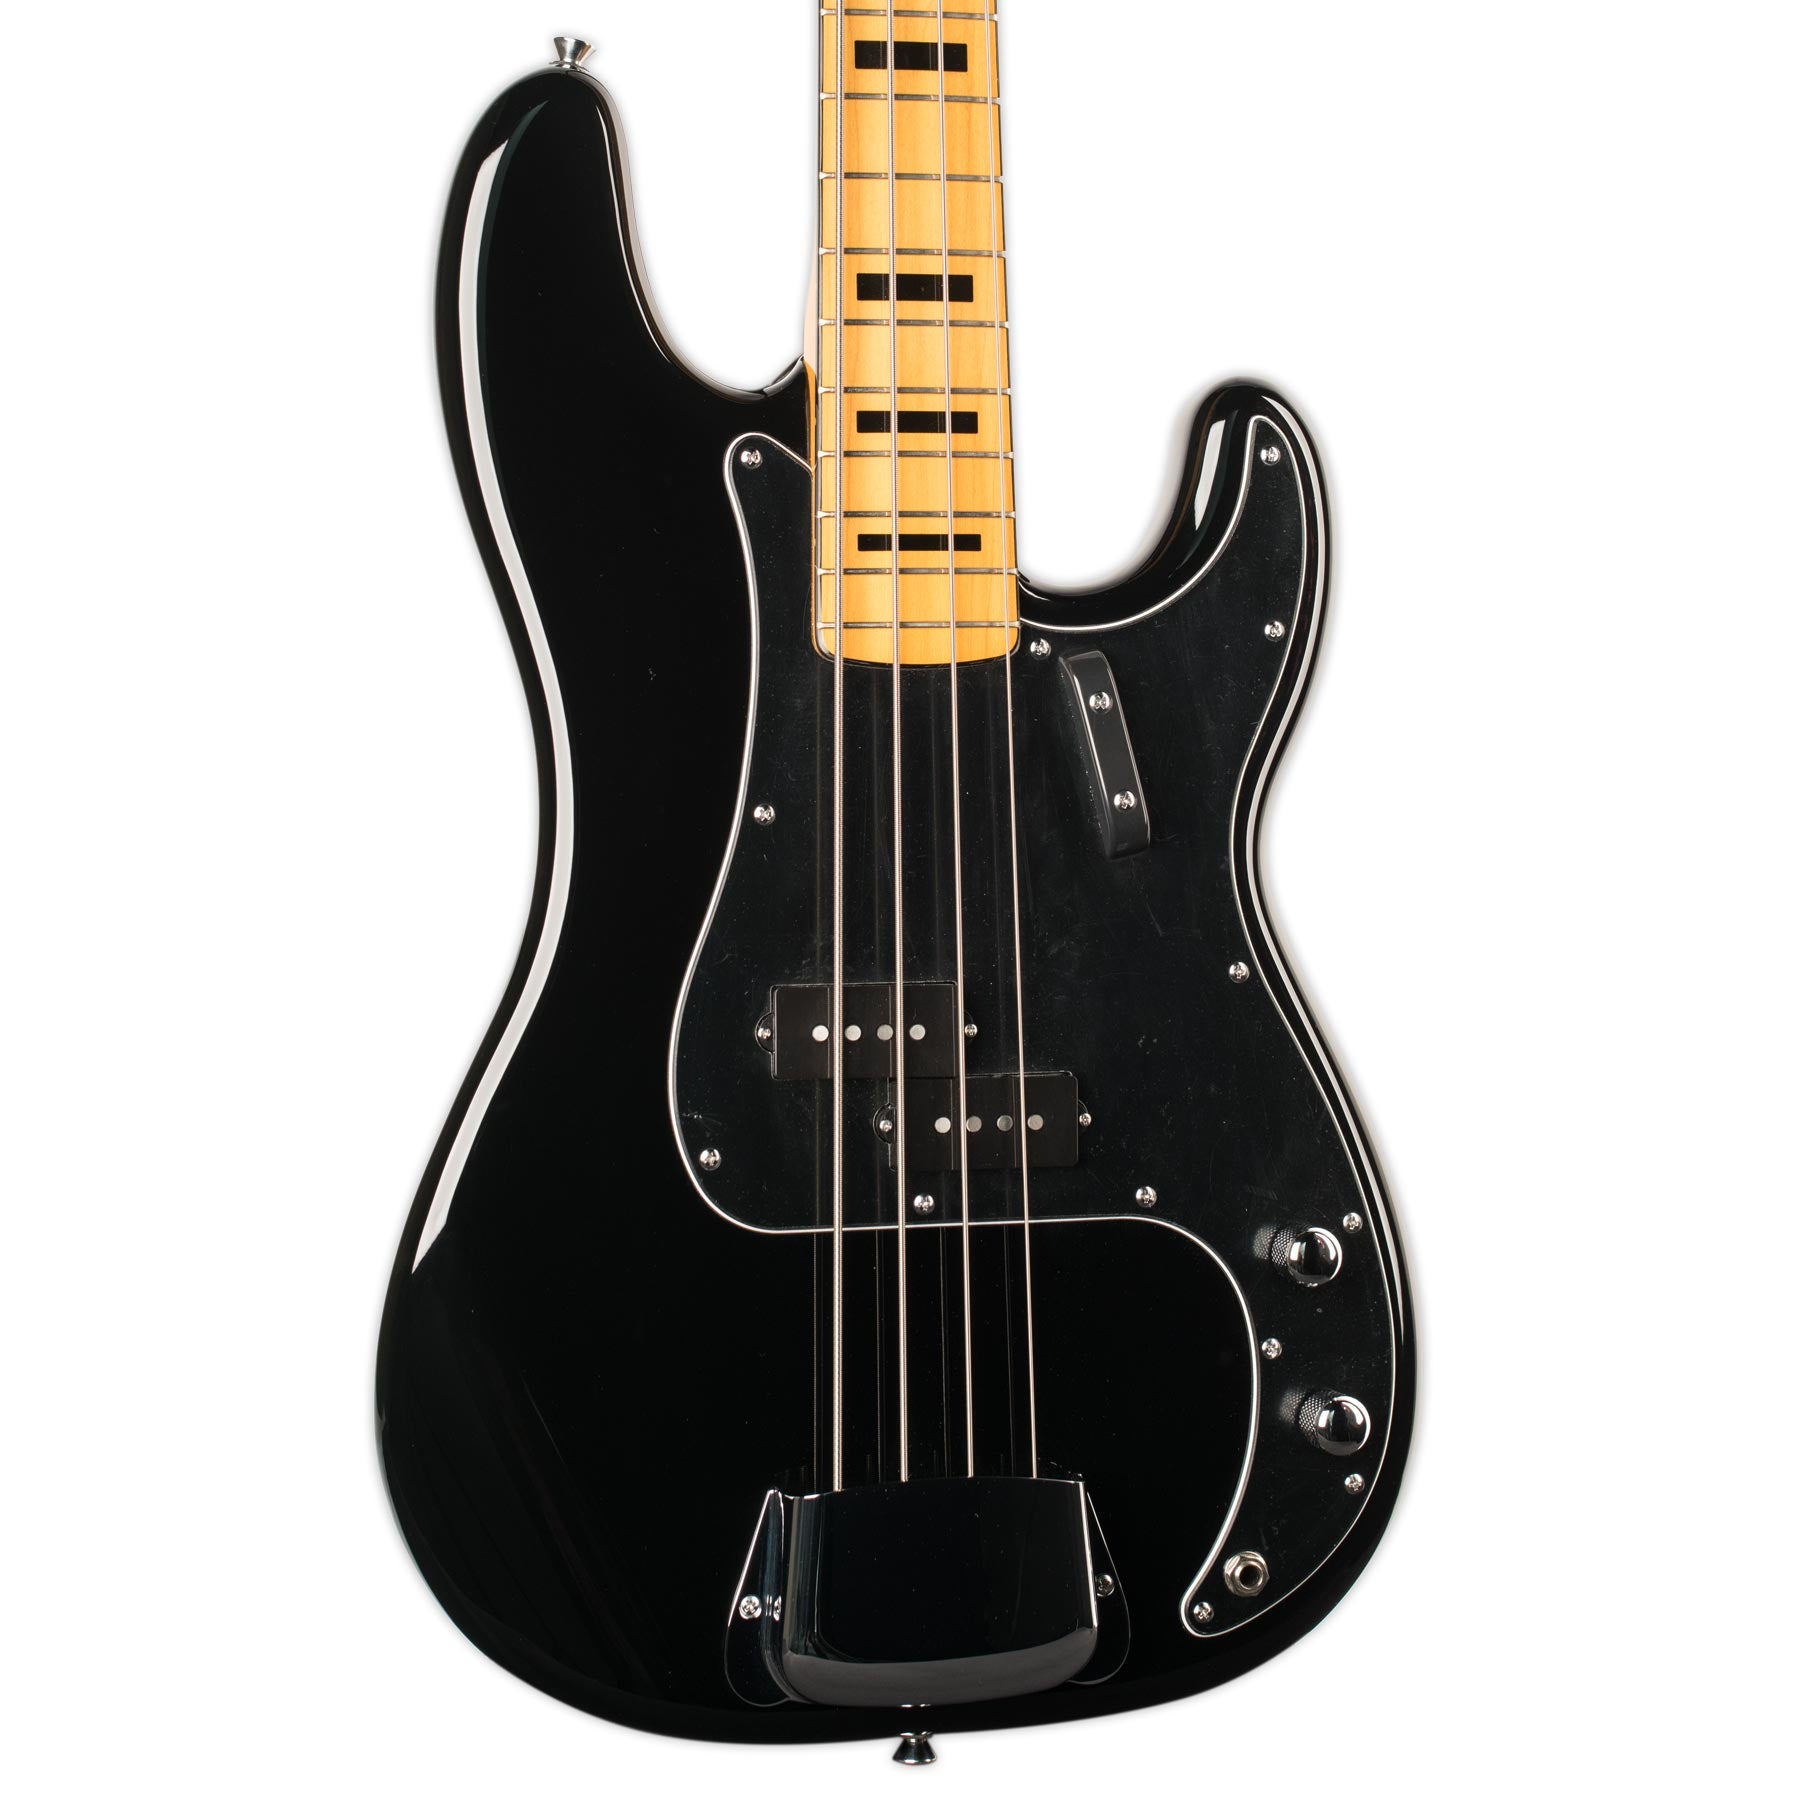 SQUIER CLASSIC VIBE 70'S P BASS MAPLE FINGERBOARD BLACK